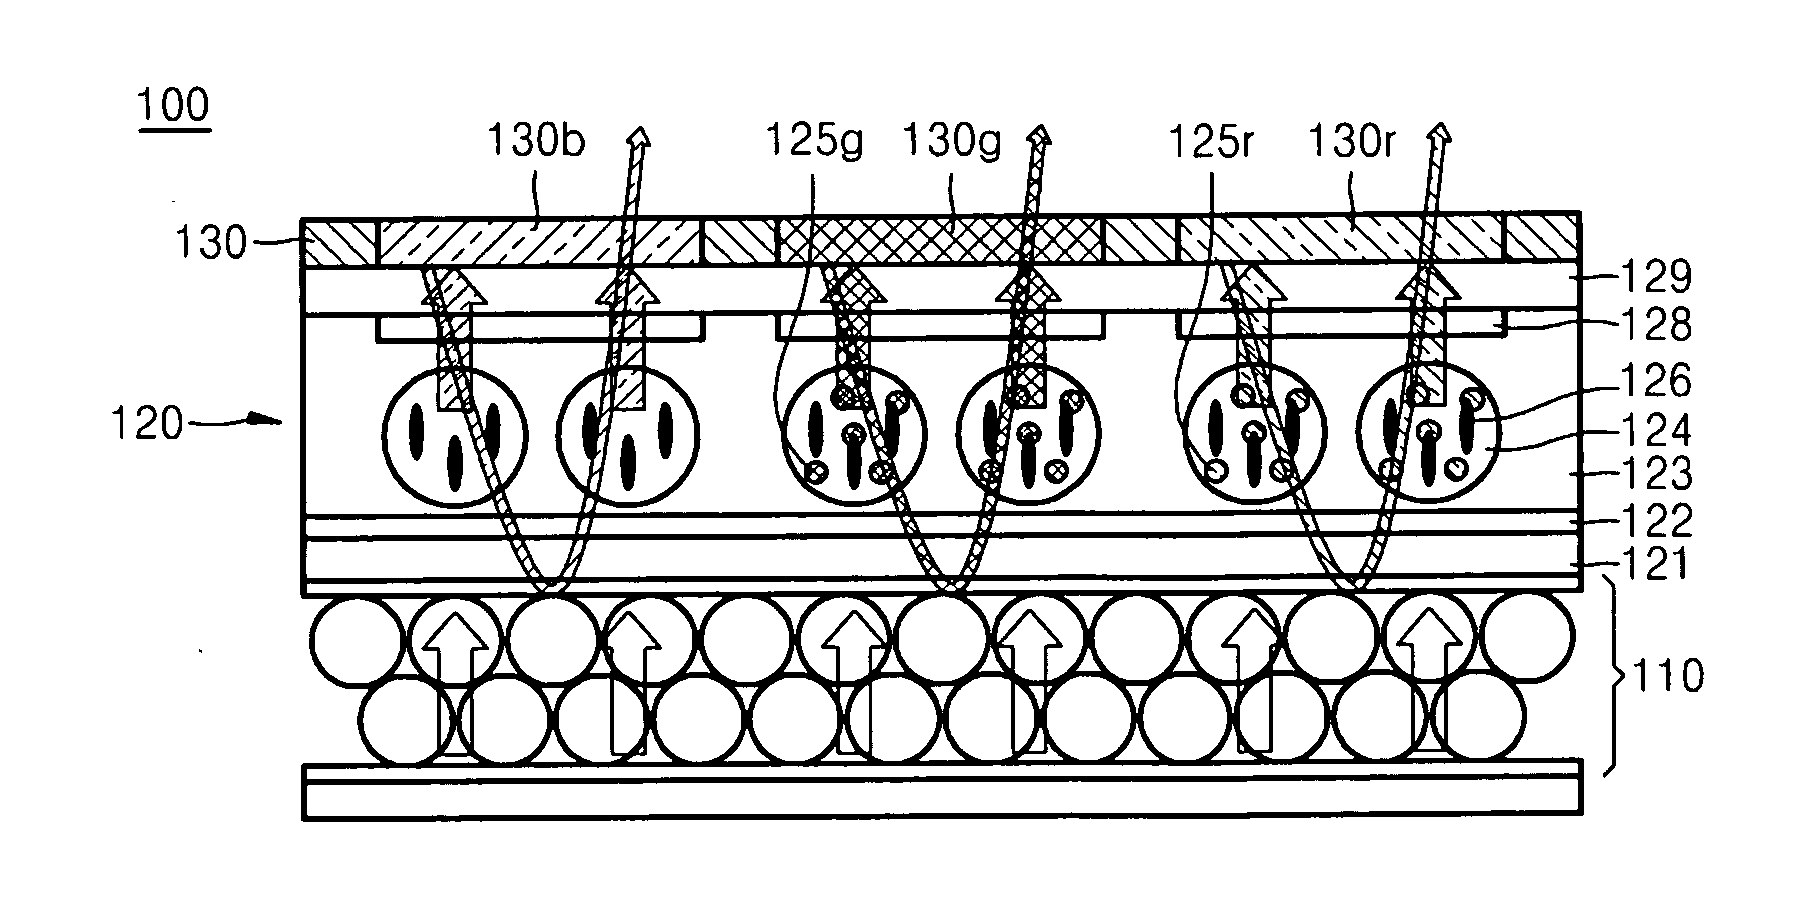 Polymer dispersed display panels including quantum dots and display apparatuses including the same